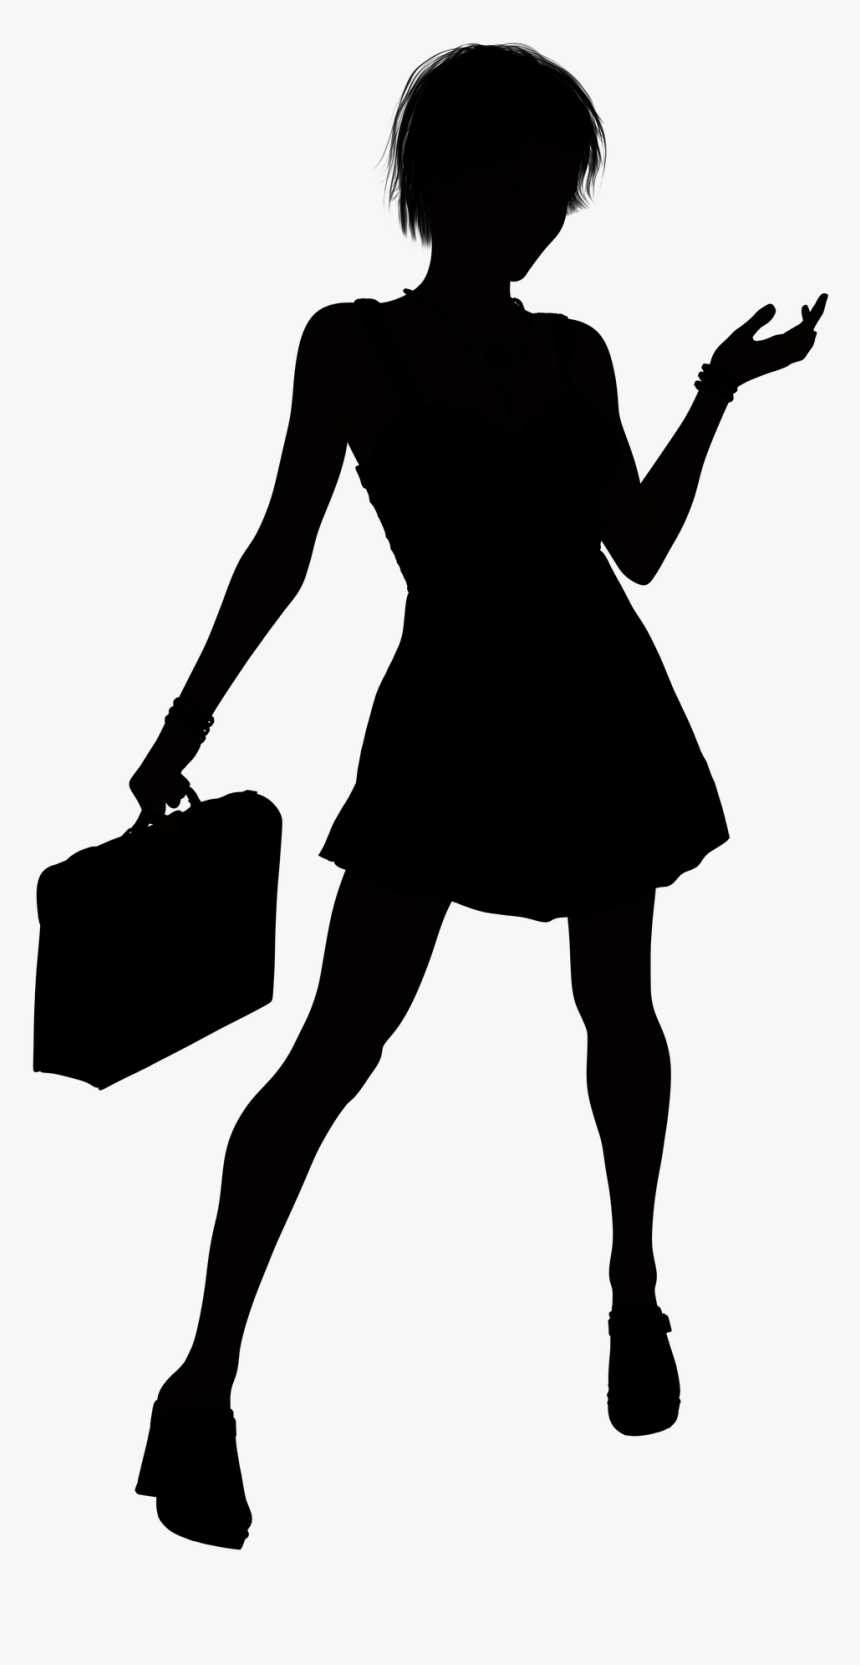 Transparent Waiter Silhouette Png - Woman Silhouette Purse, Png Download, Free Download